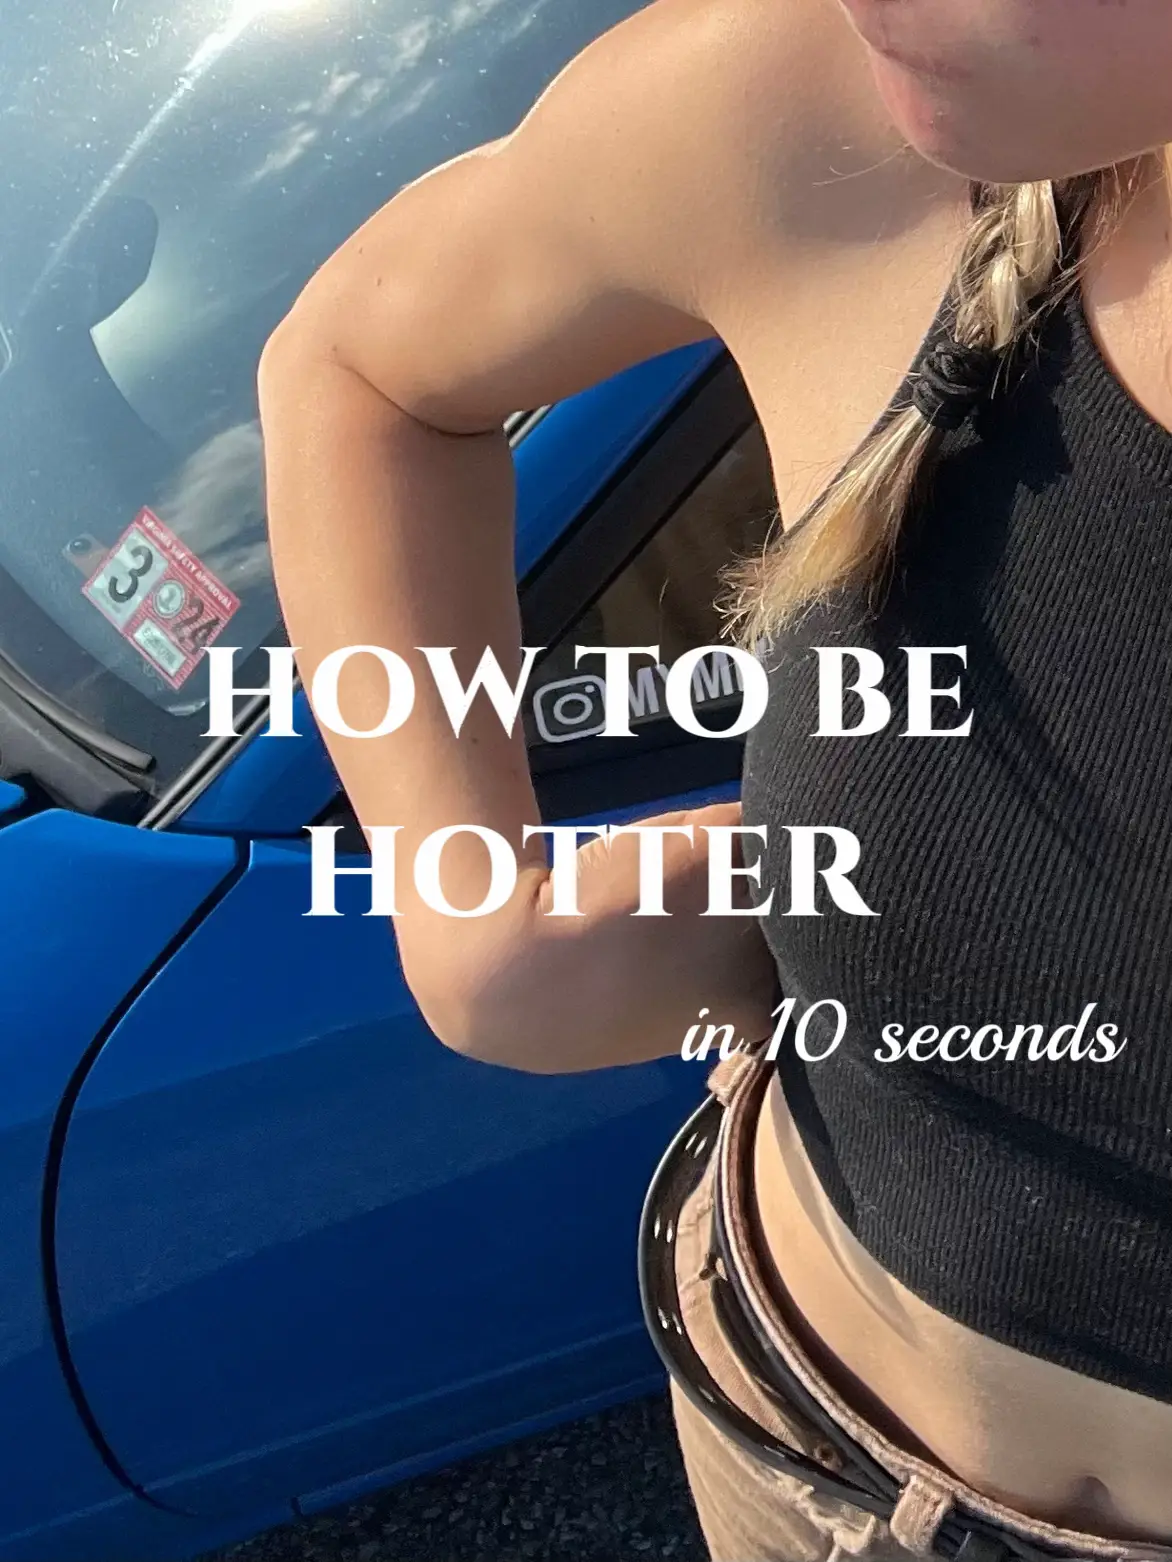 HOW TO BE HOTTER in 10 seconds's images